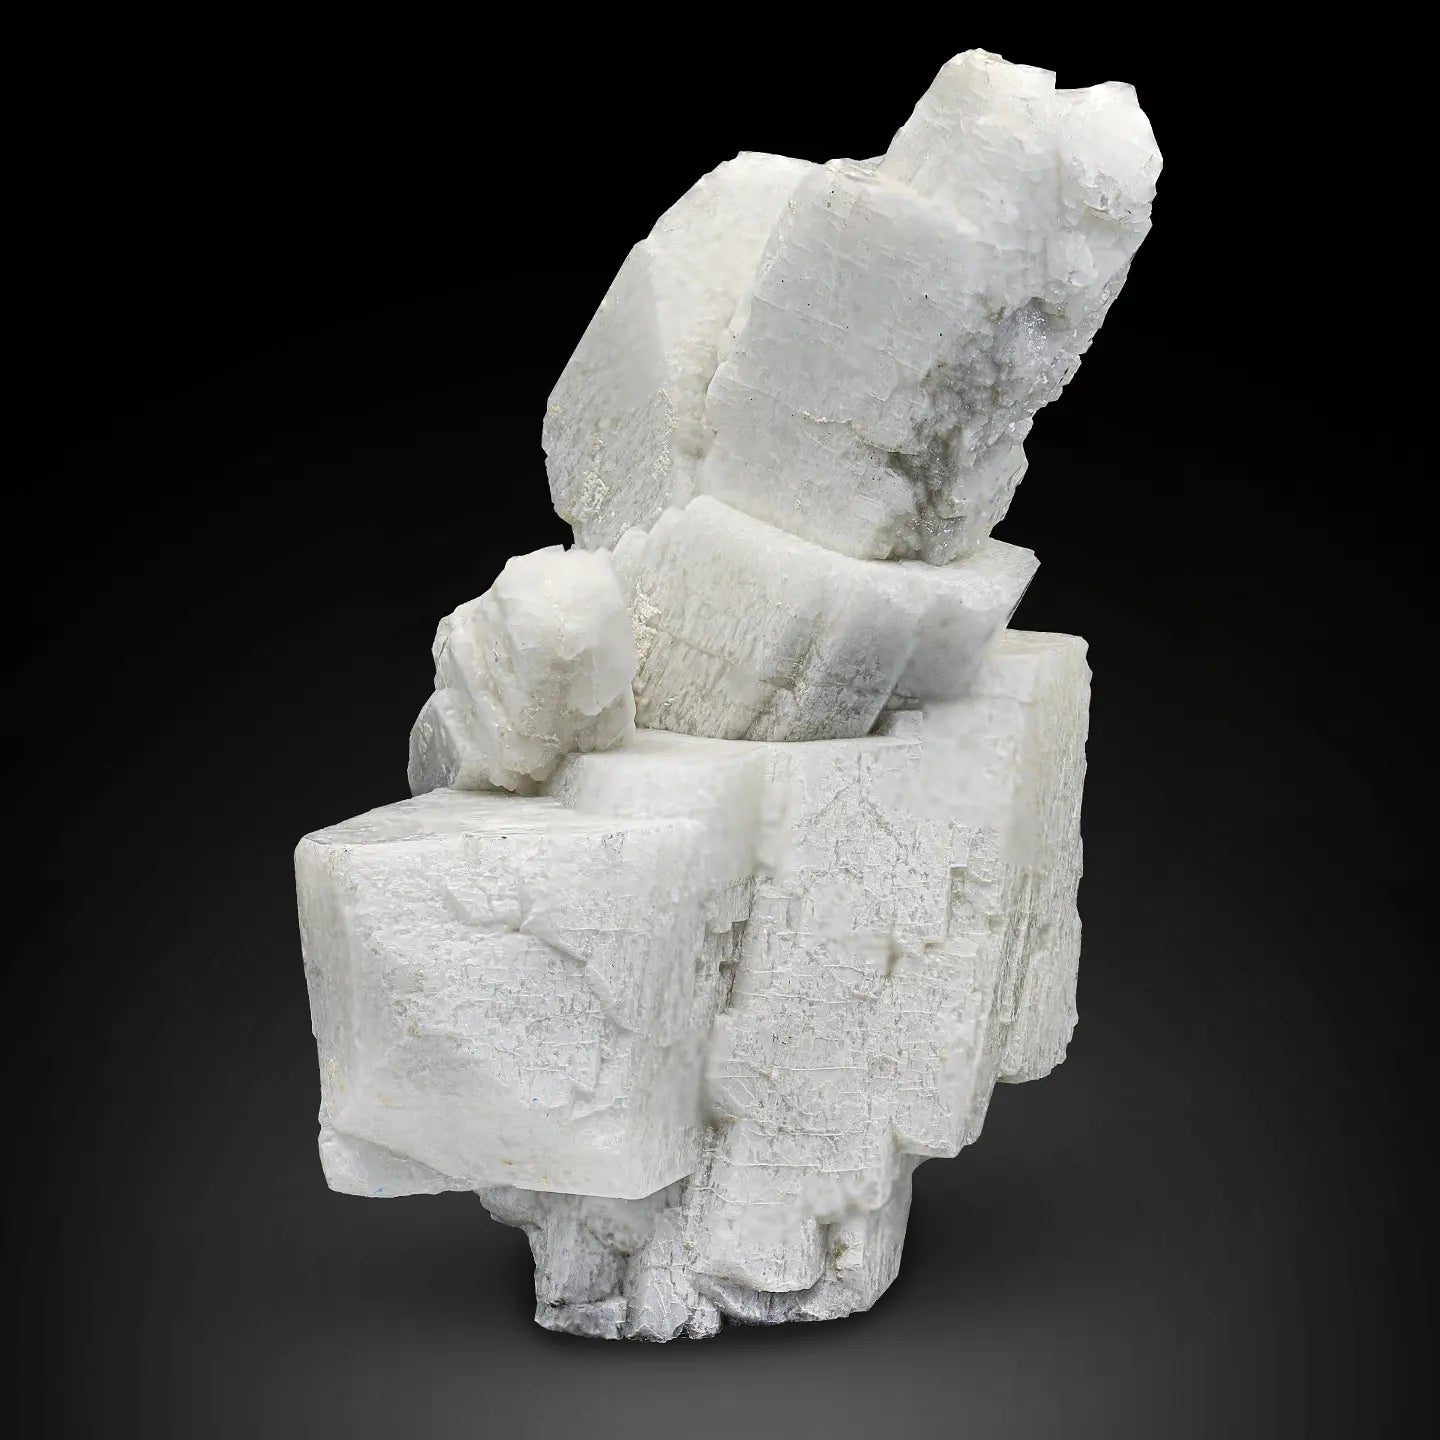 Ethereal Twinned Microcline Feldspar Crystal Aggregate with Milky White wet Luster from Pakistan